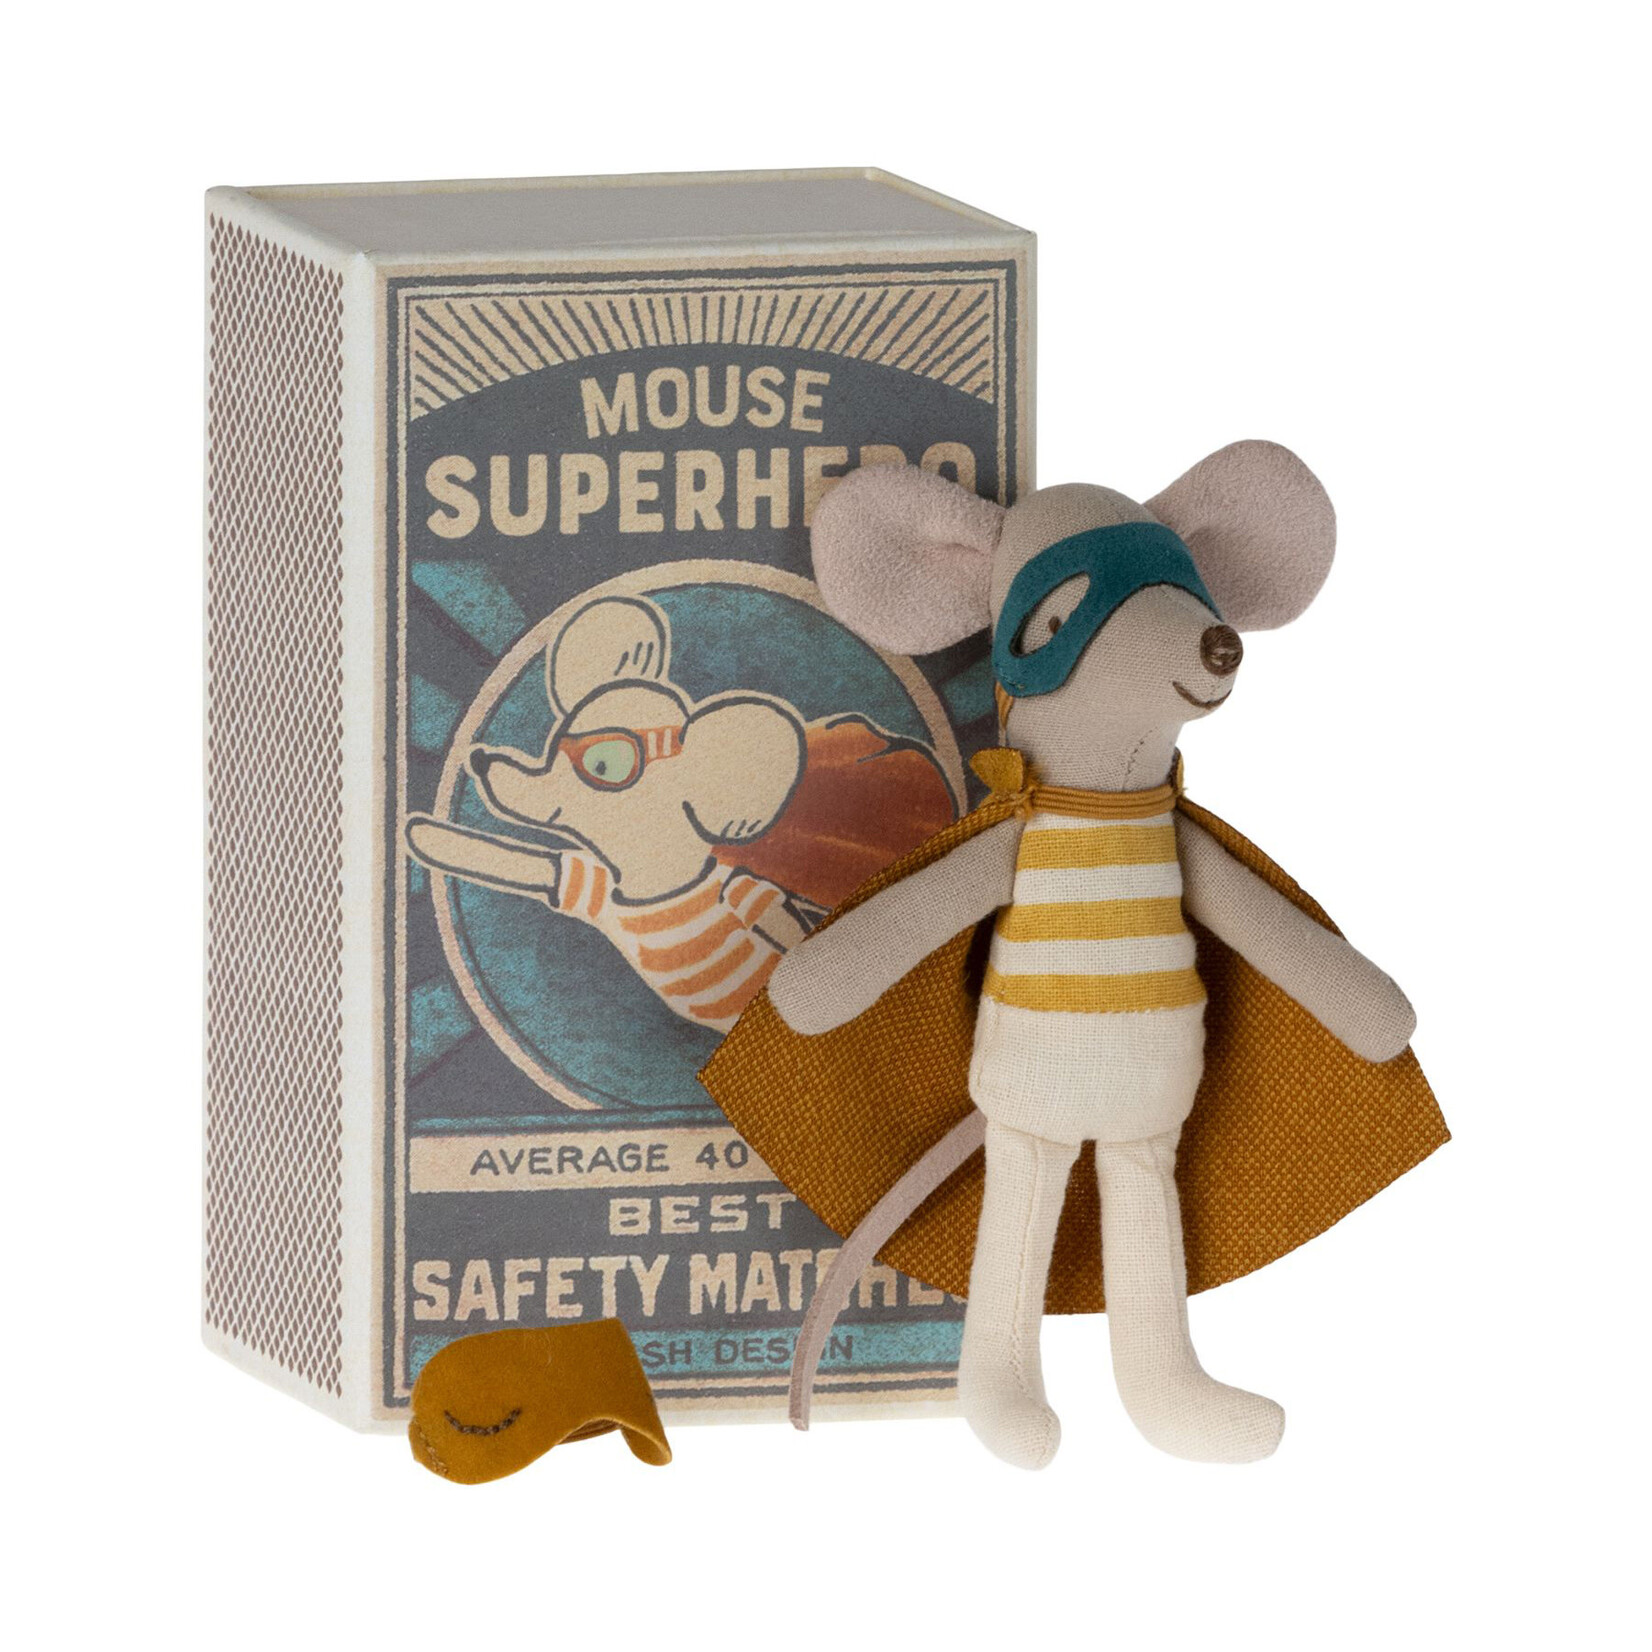 Maileg Maileg Super hero mouse, Little brother in matchbox